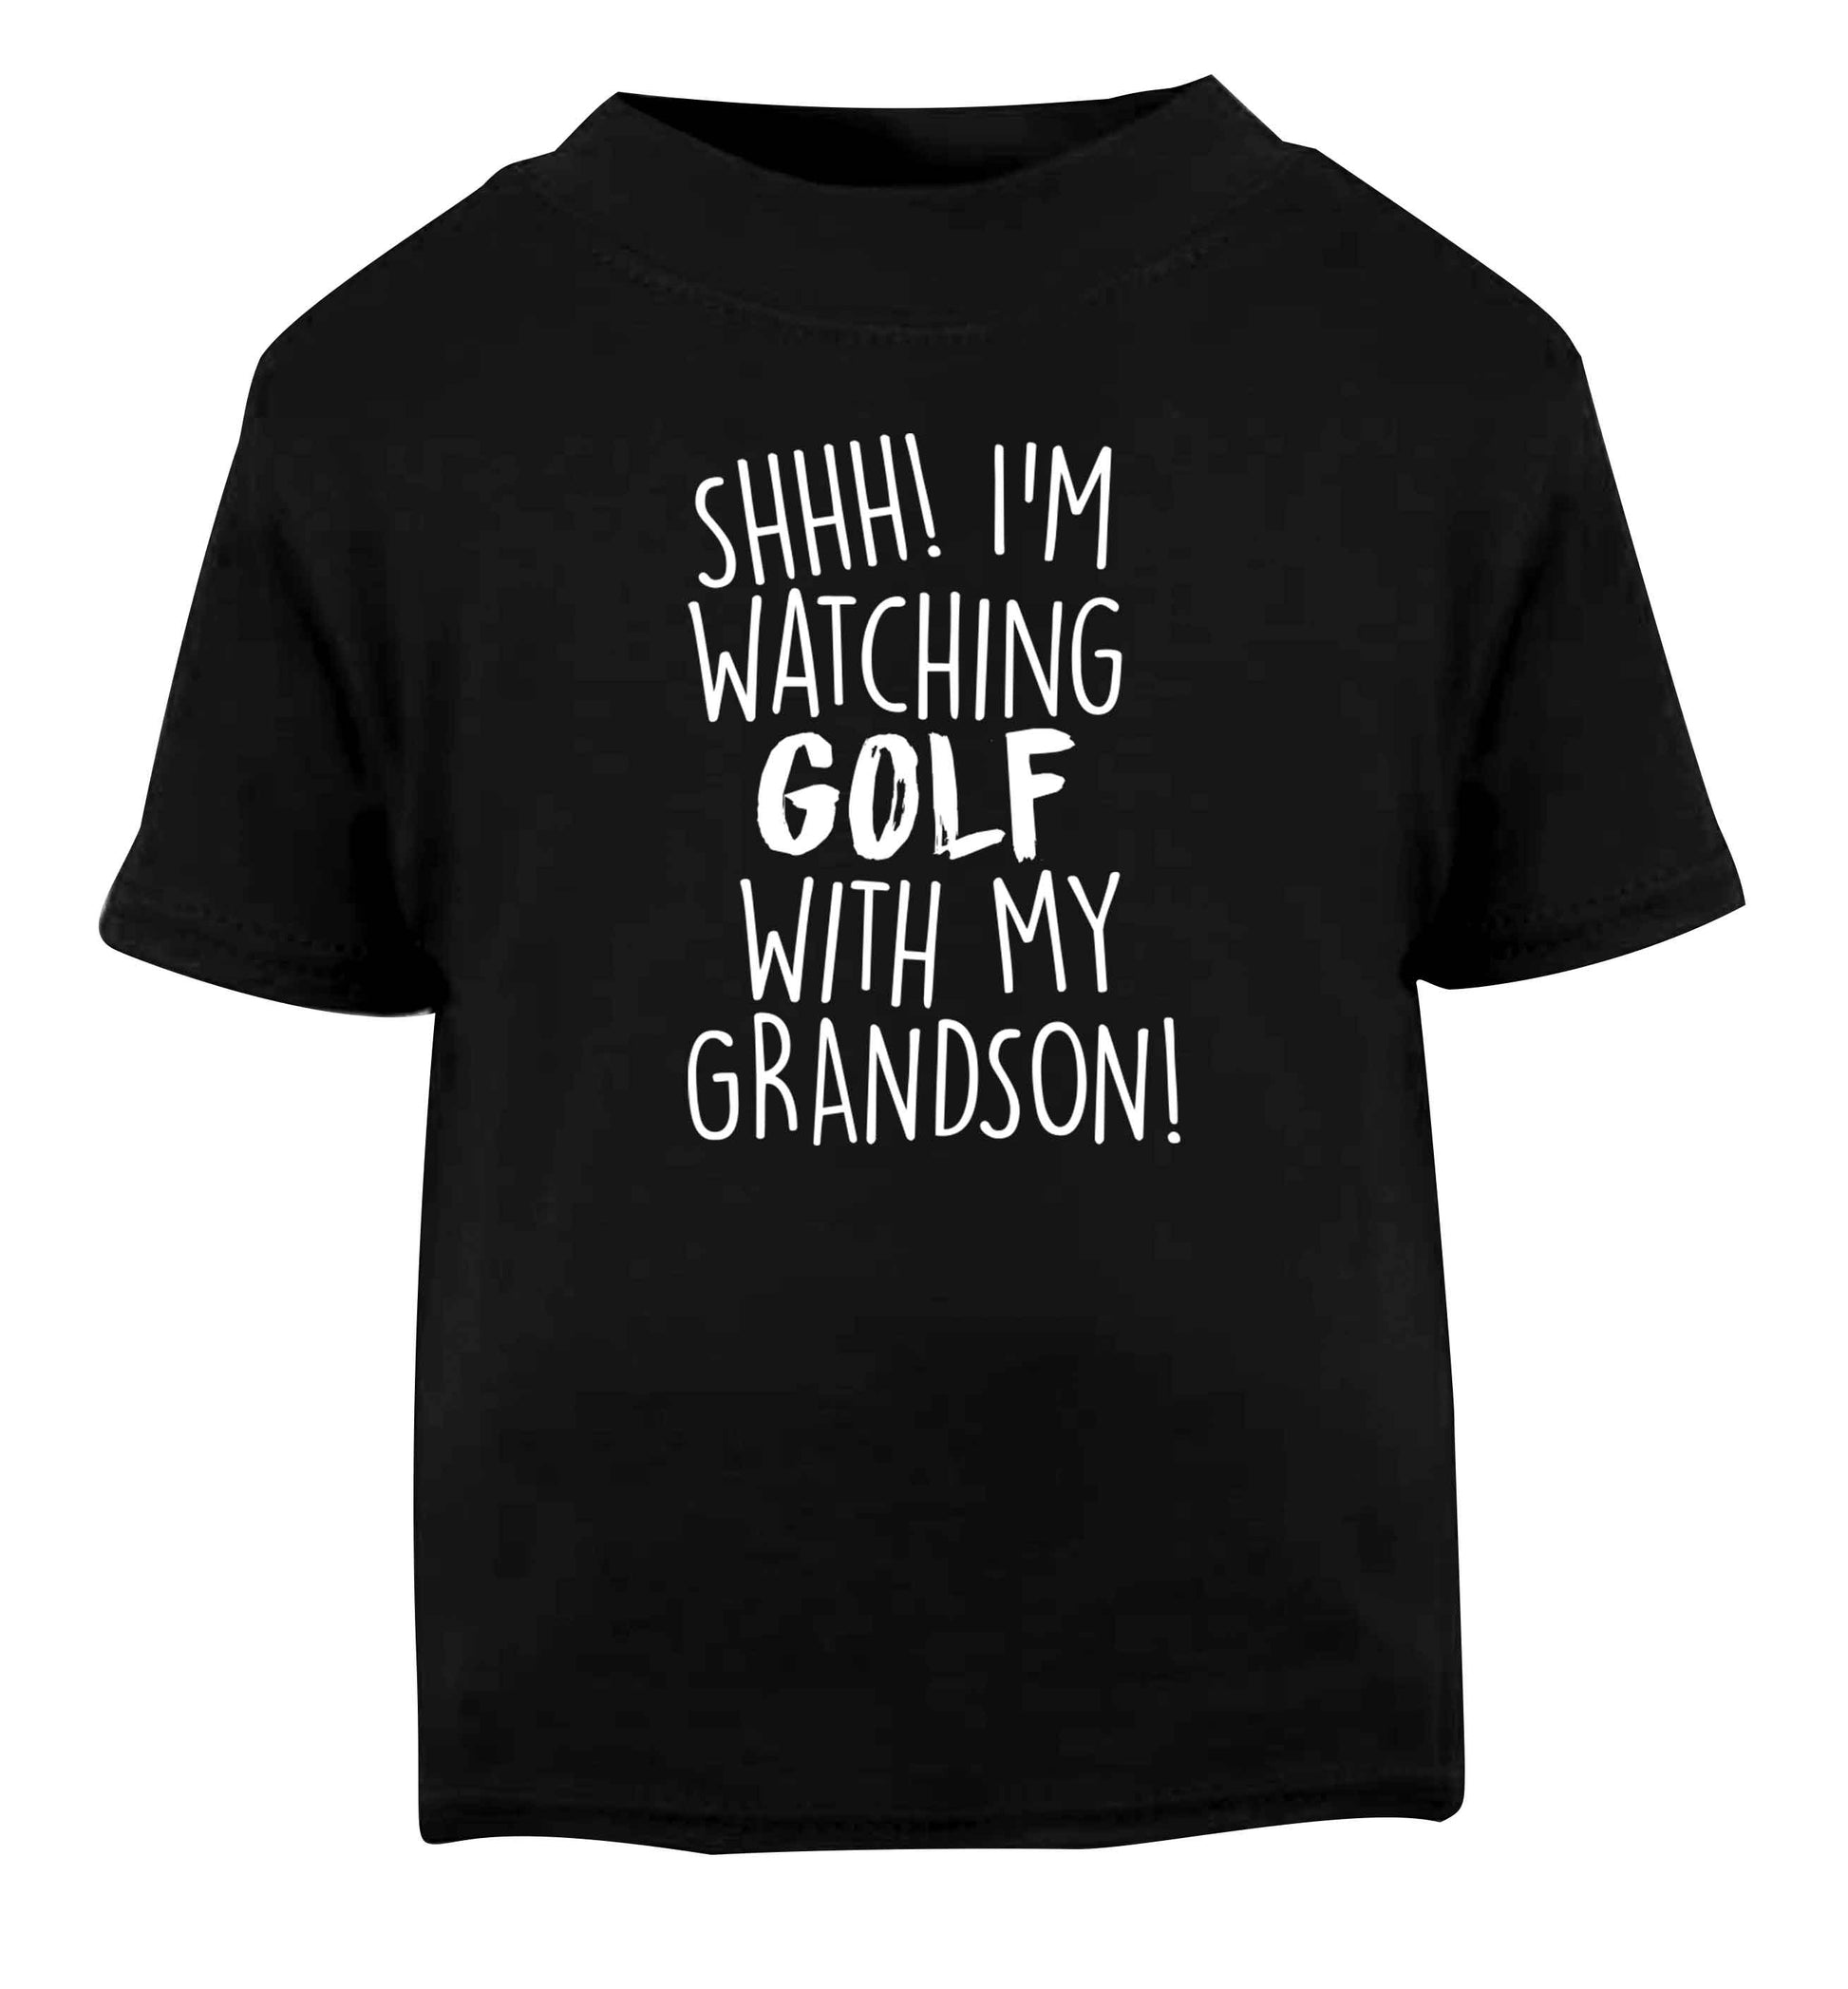 Shh I'm watching golf with my grandsonBlack Baby Toddler Tshirt 2 years